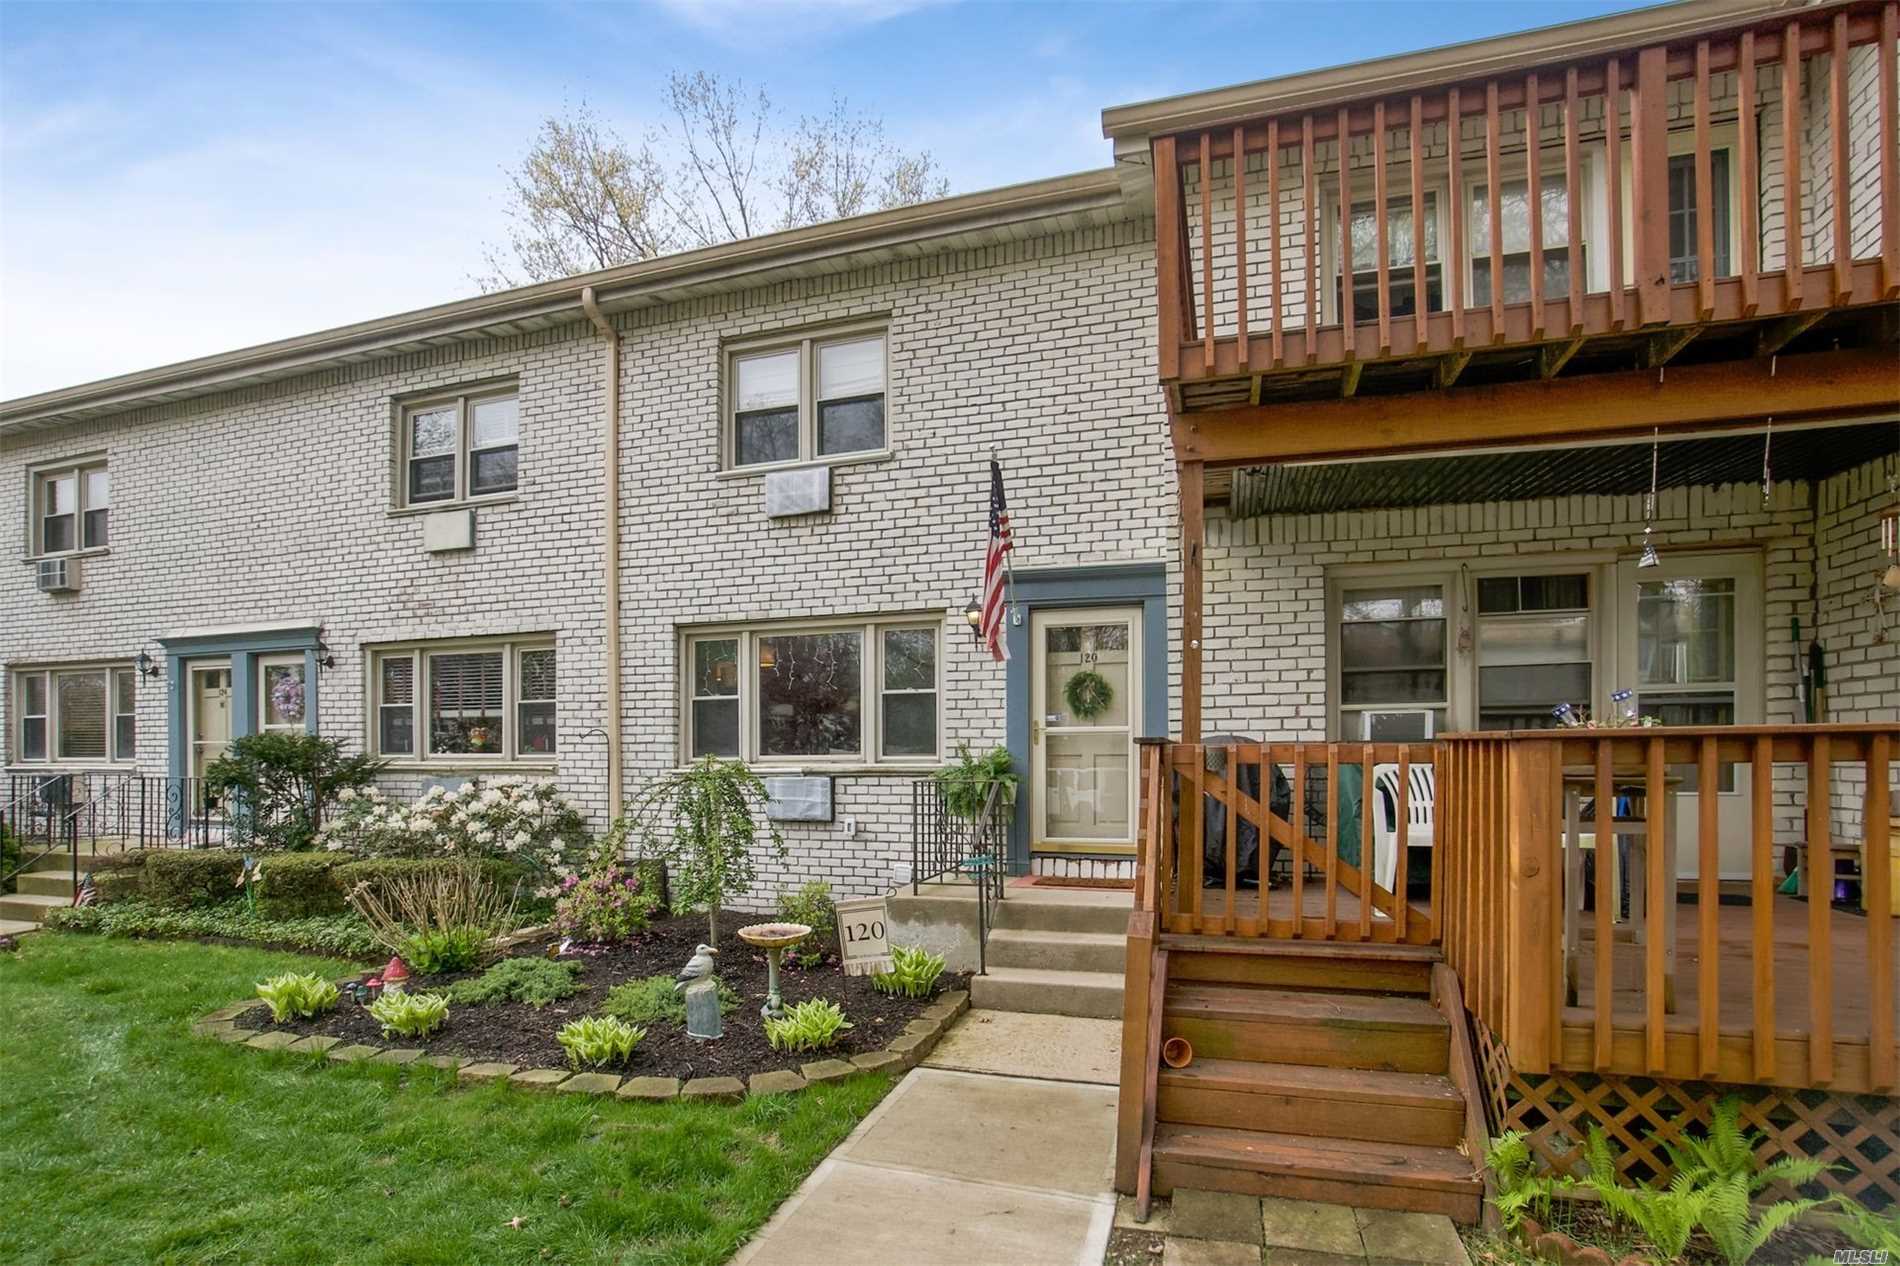 Beautiful Townhouse Style Co-op Boasts Gleaming Hardwood floors, updated Eat-in Kitchen with Newer Appliances, Updated 1.5 baths. Huge Master Bedroom & Generous 2nd Bdrm. Plenty of closets! Laundry in Unit. South Facing Deck, Perfect for Entertaining!